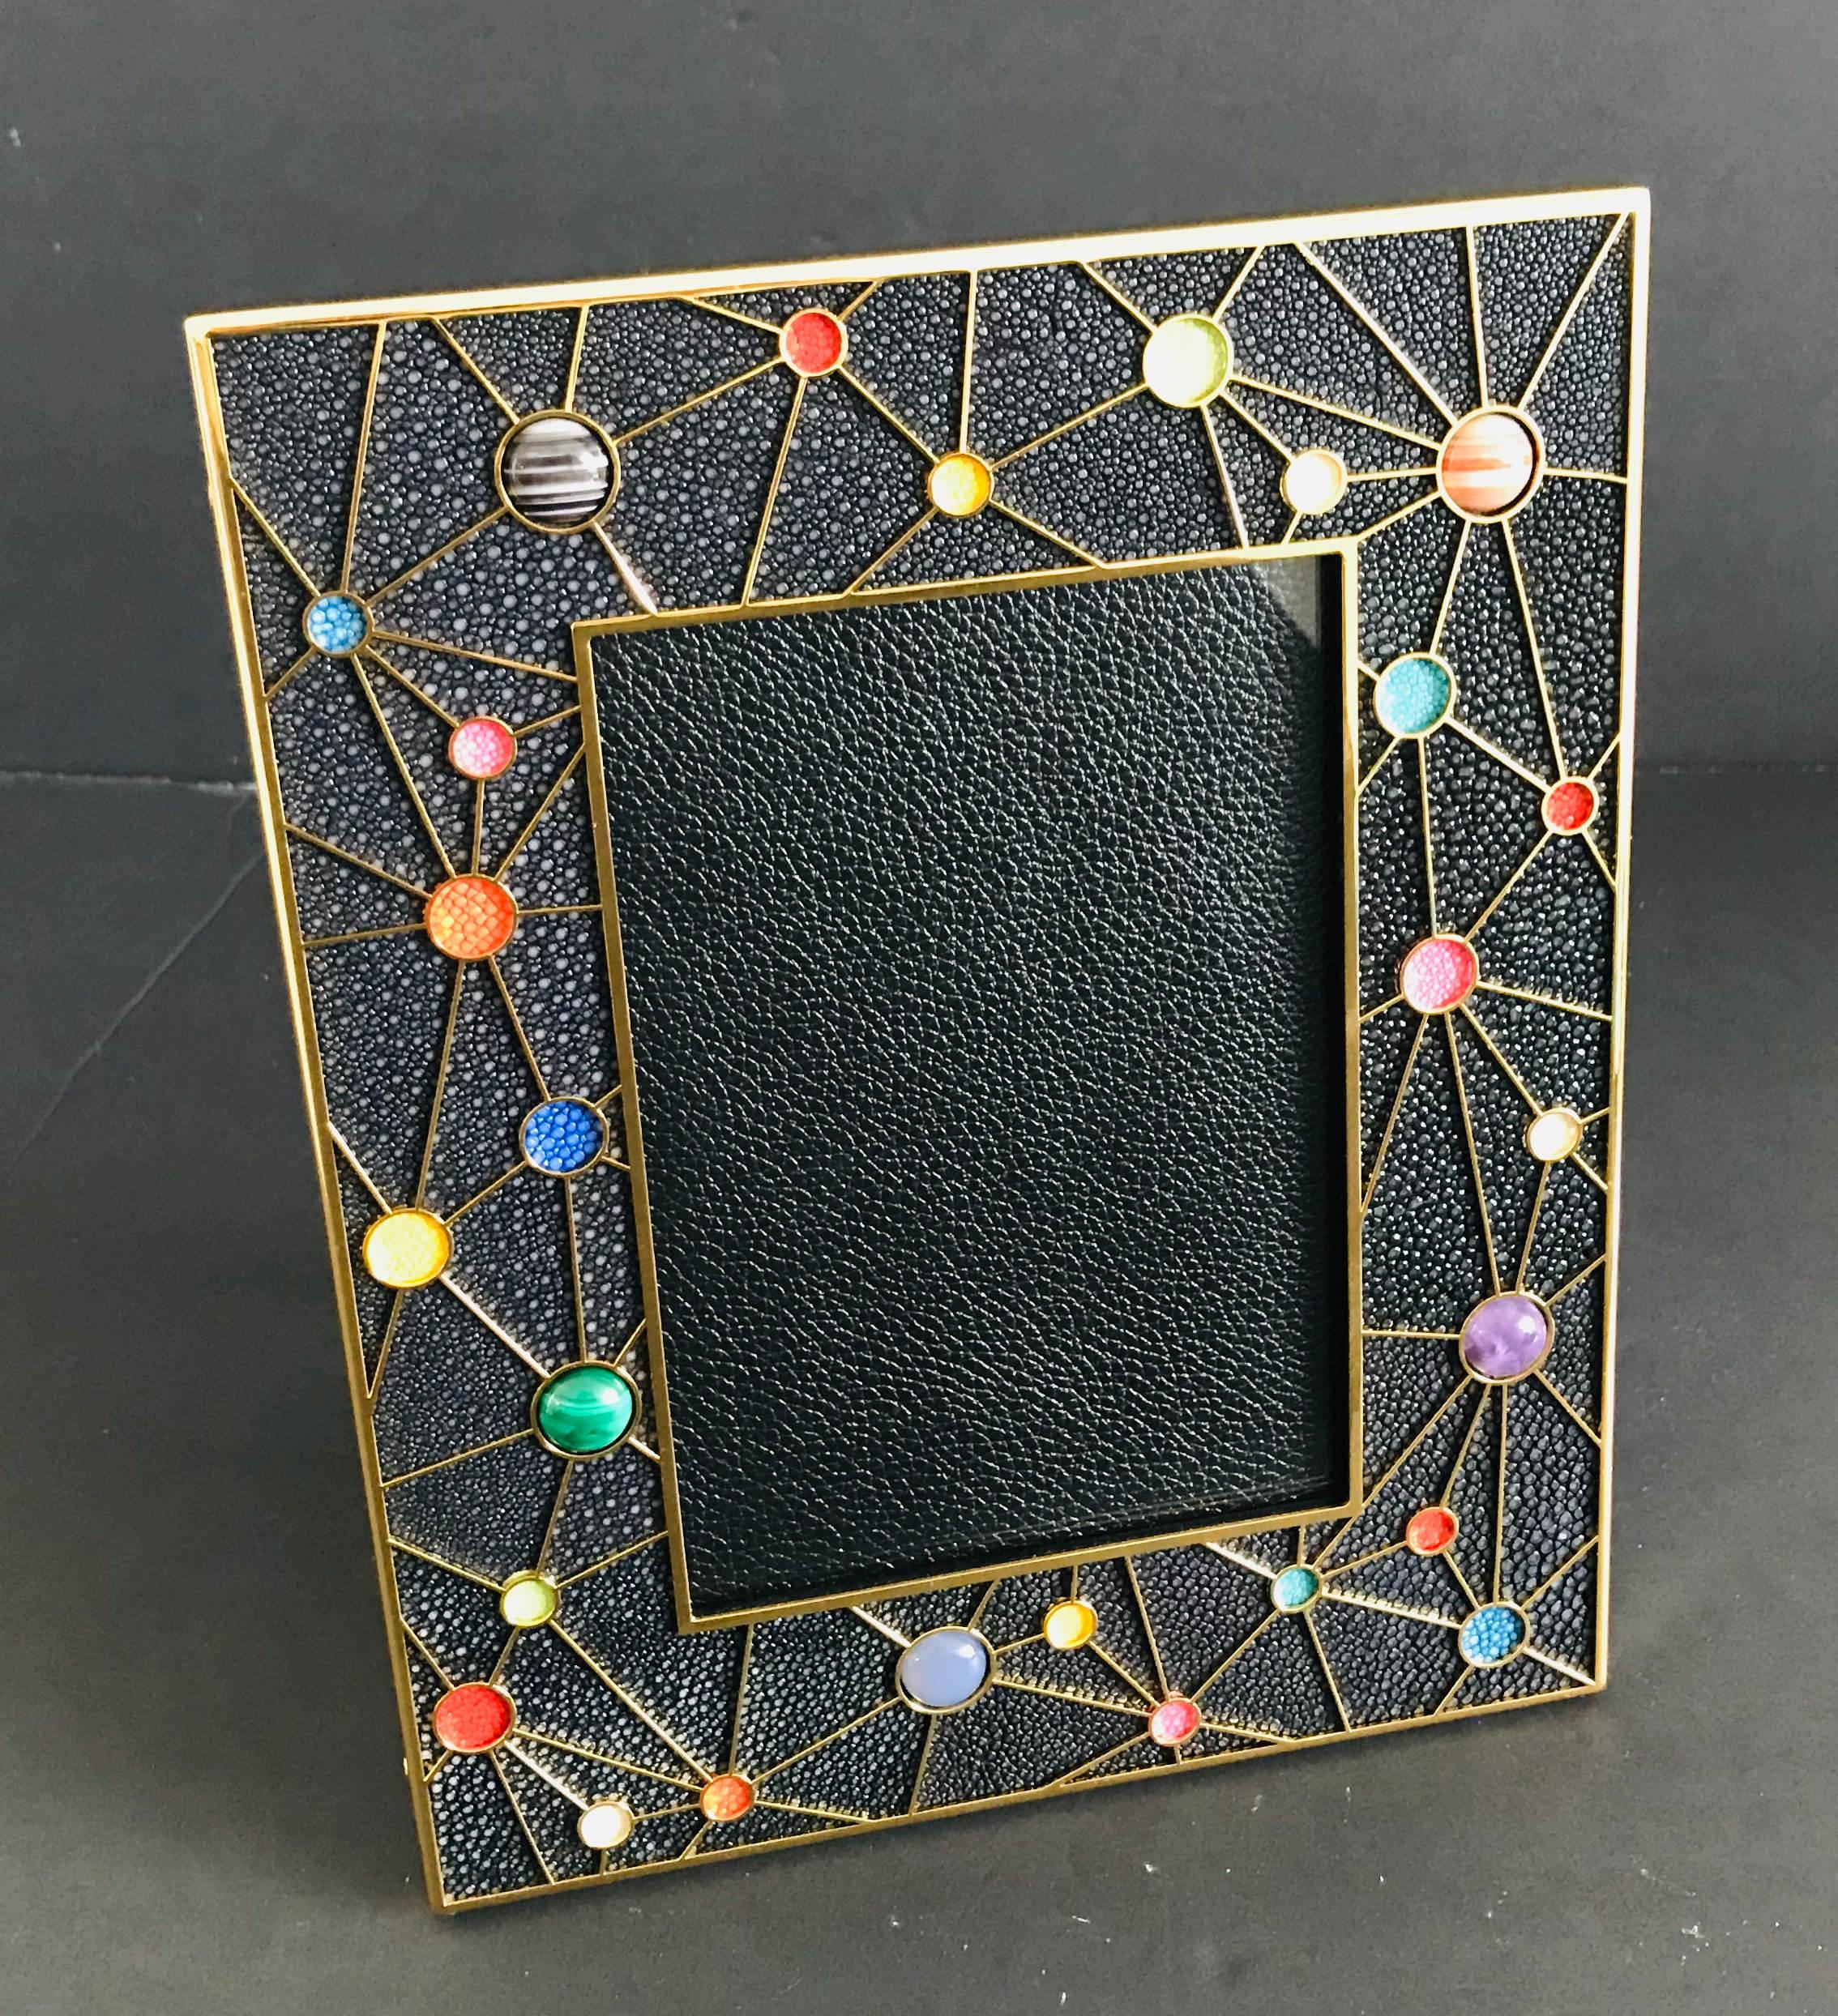 Black shagreen with multi-color stones and gold-plated picture frame by Fabio Ltd
Height: 10.5 inches / Width: 8.5 inches / Depth: 1 inch
Photo size: 5 inches by 7 inches
1 in stock in Palm Springs
Order Reference #: FABIOLTD PF42
This piece makes